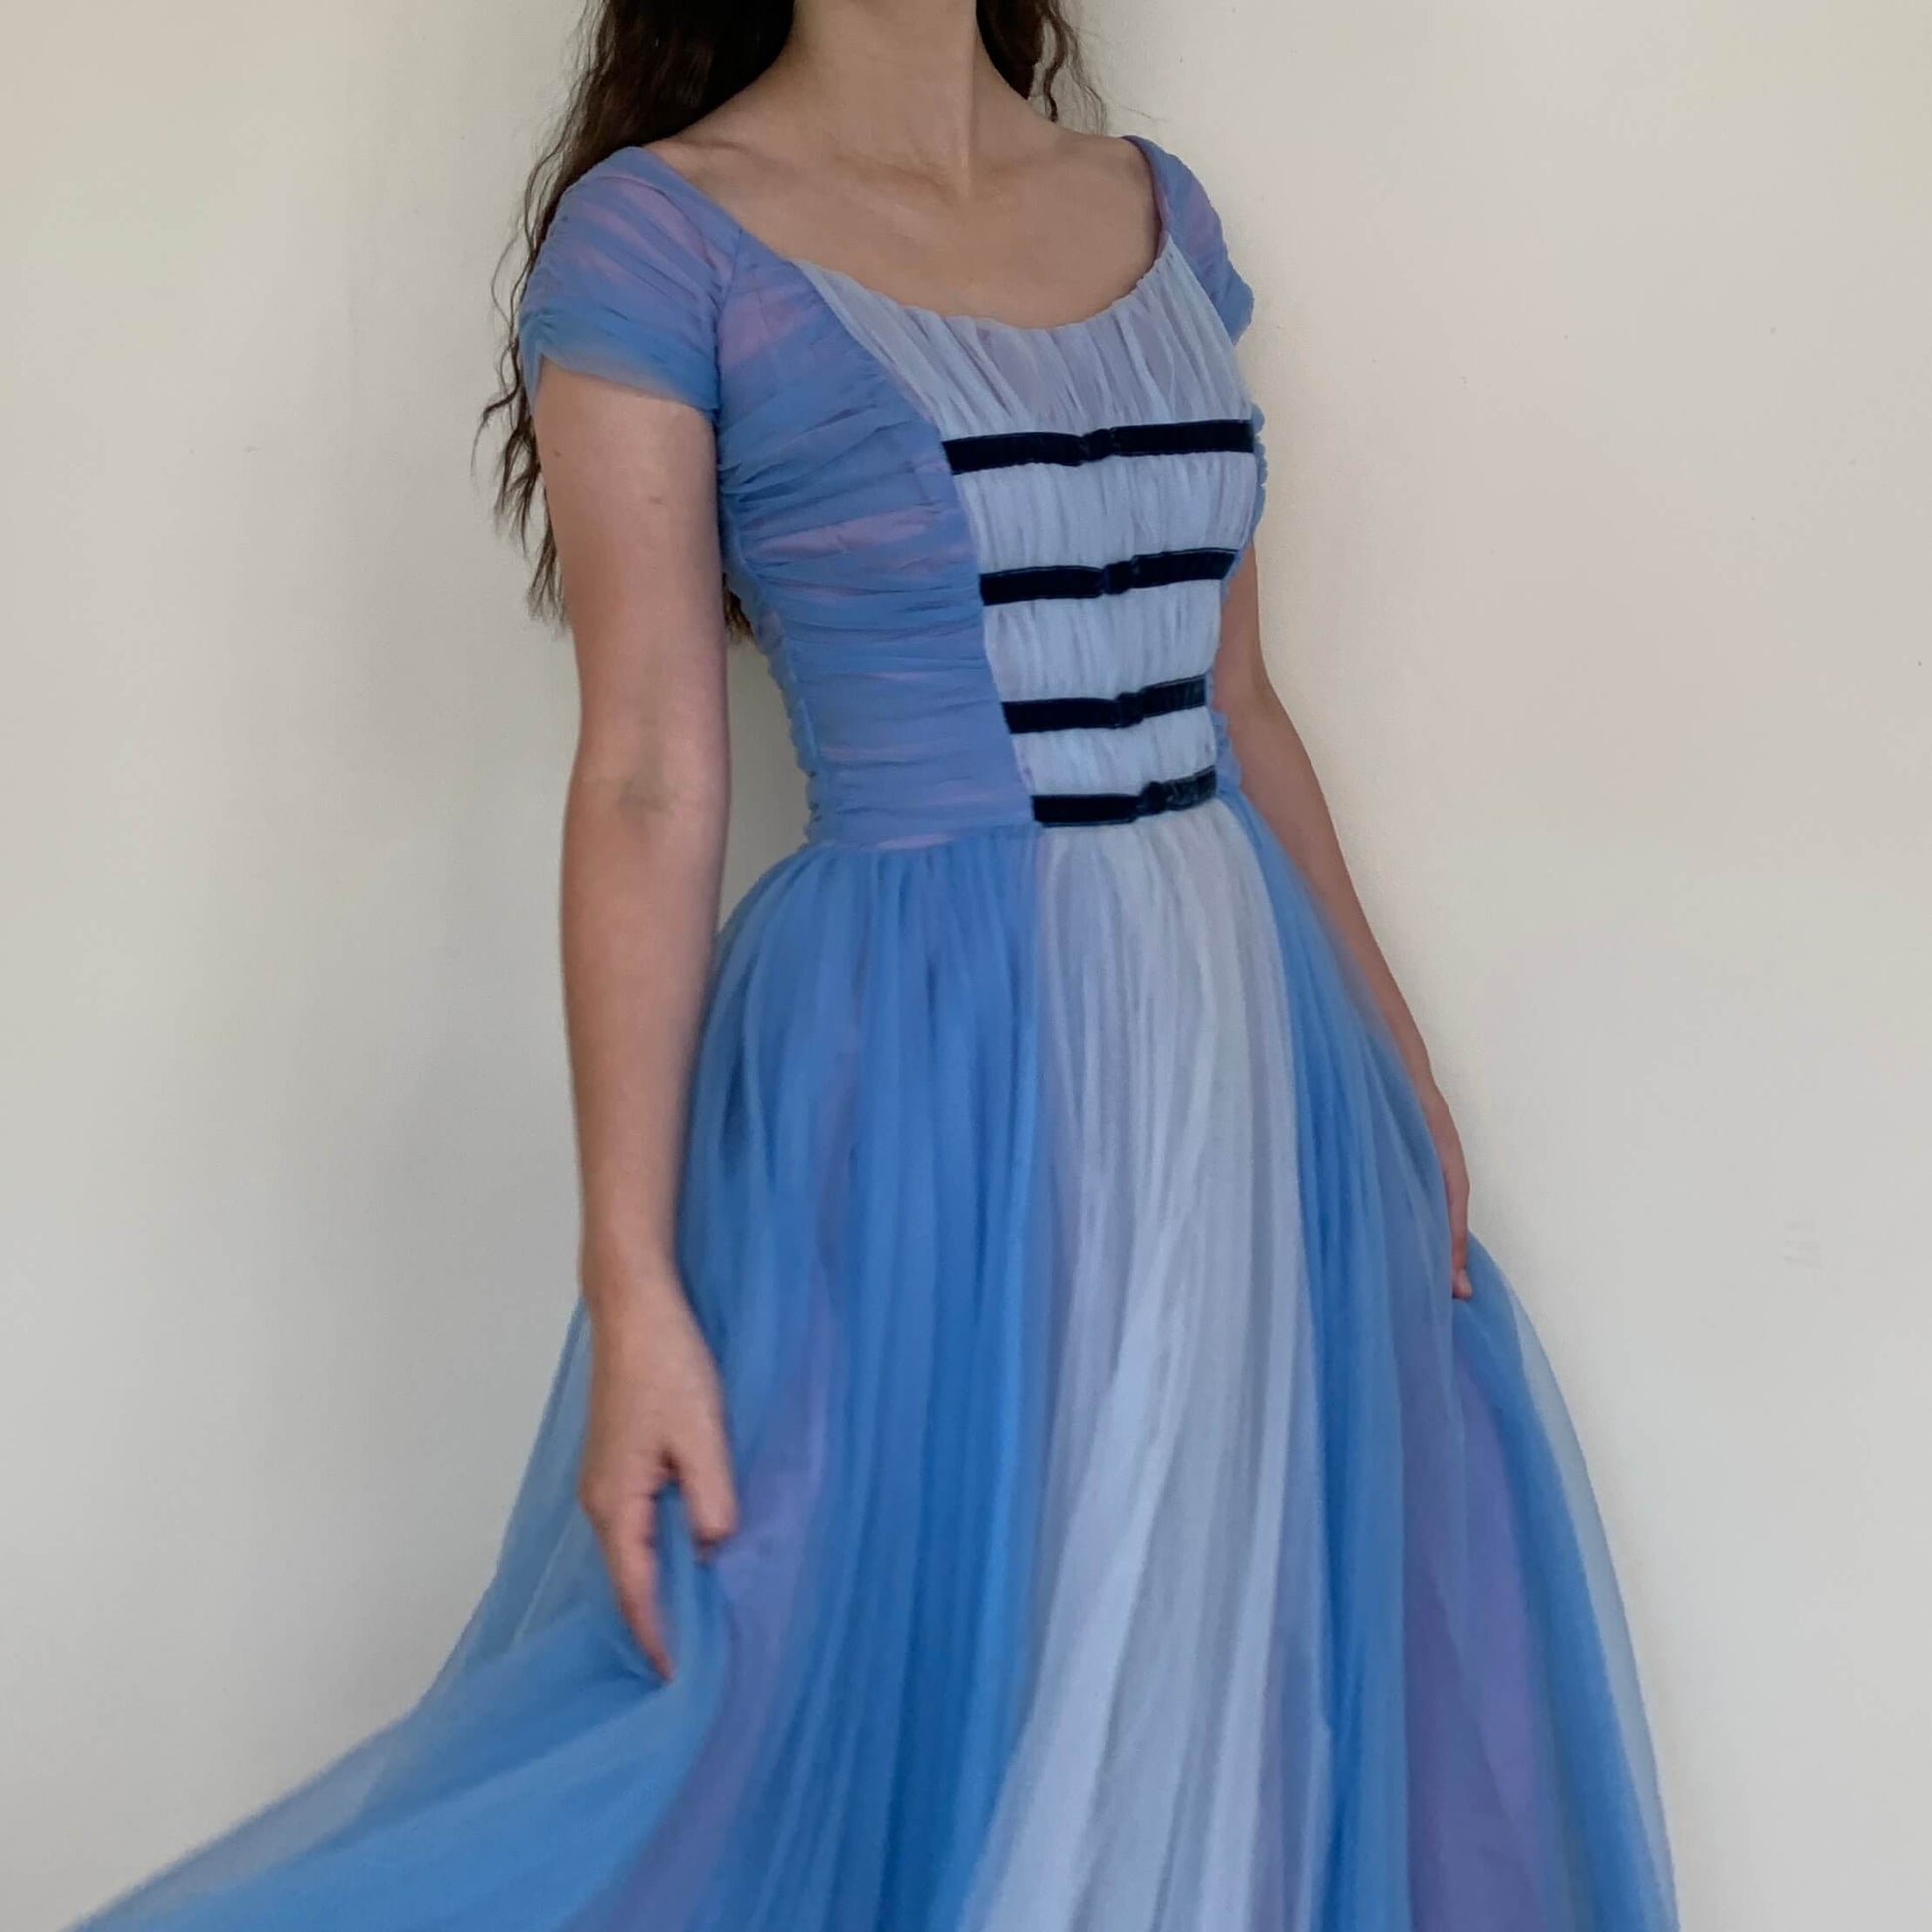 50s vintage tulle dress in blue with cap sleeves